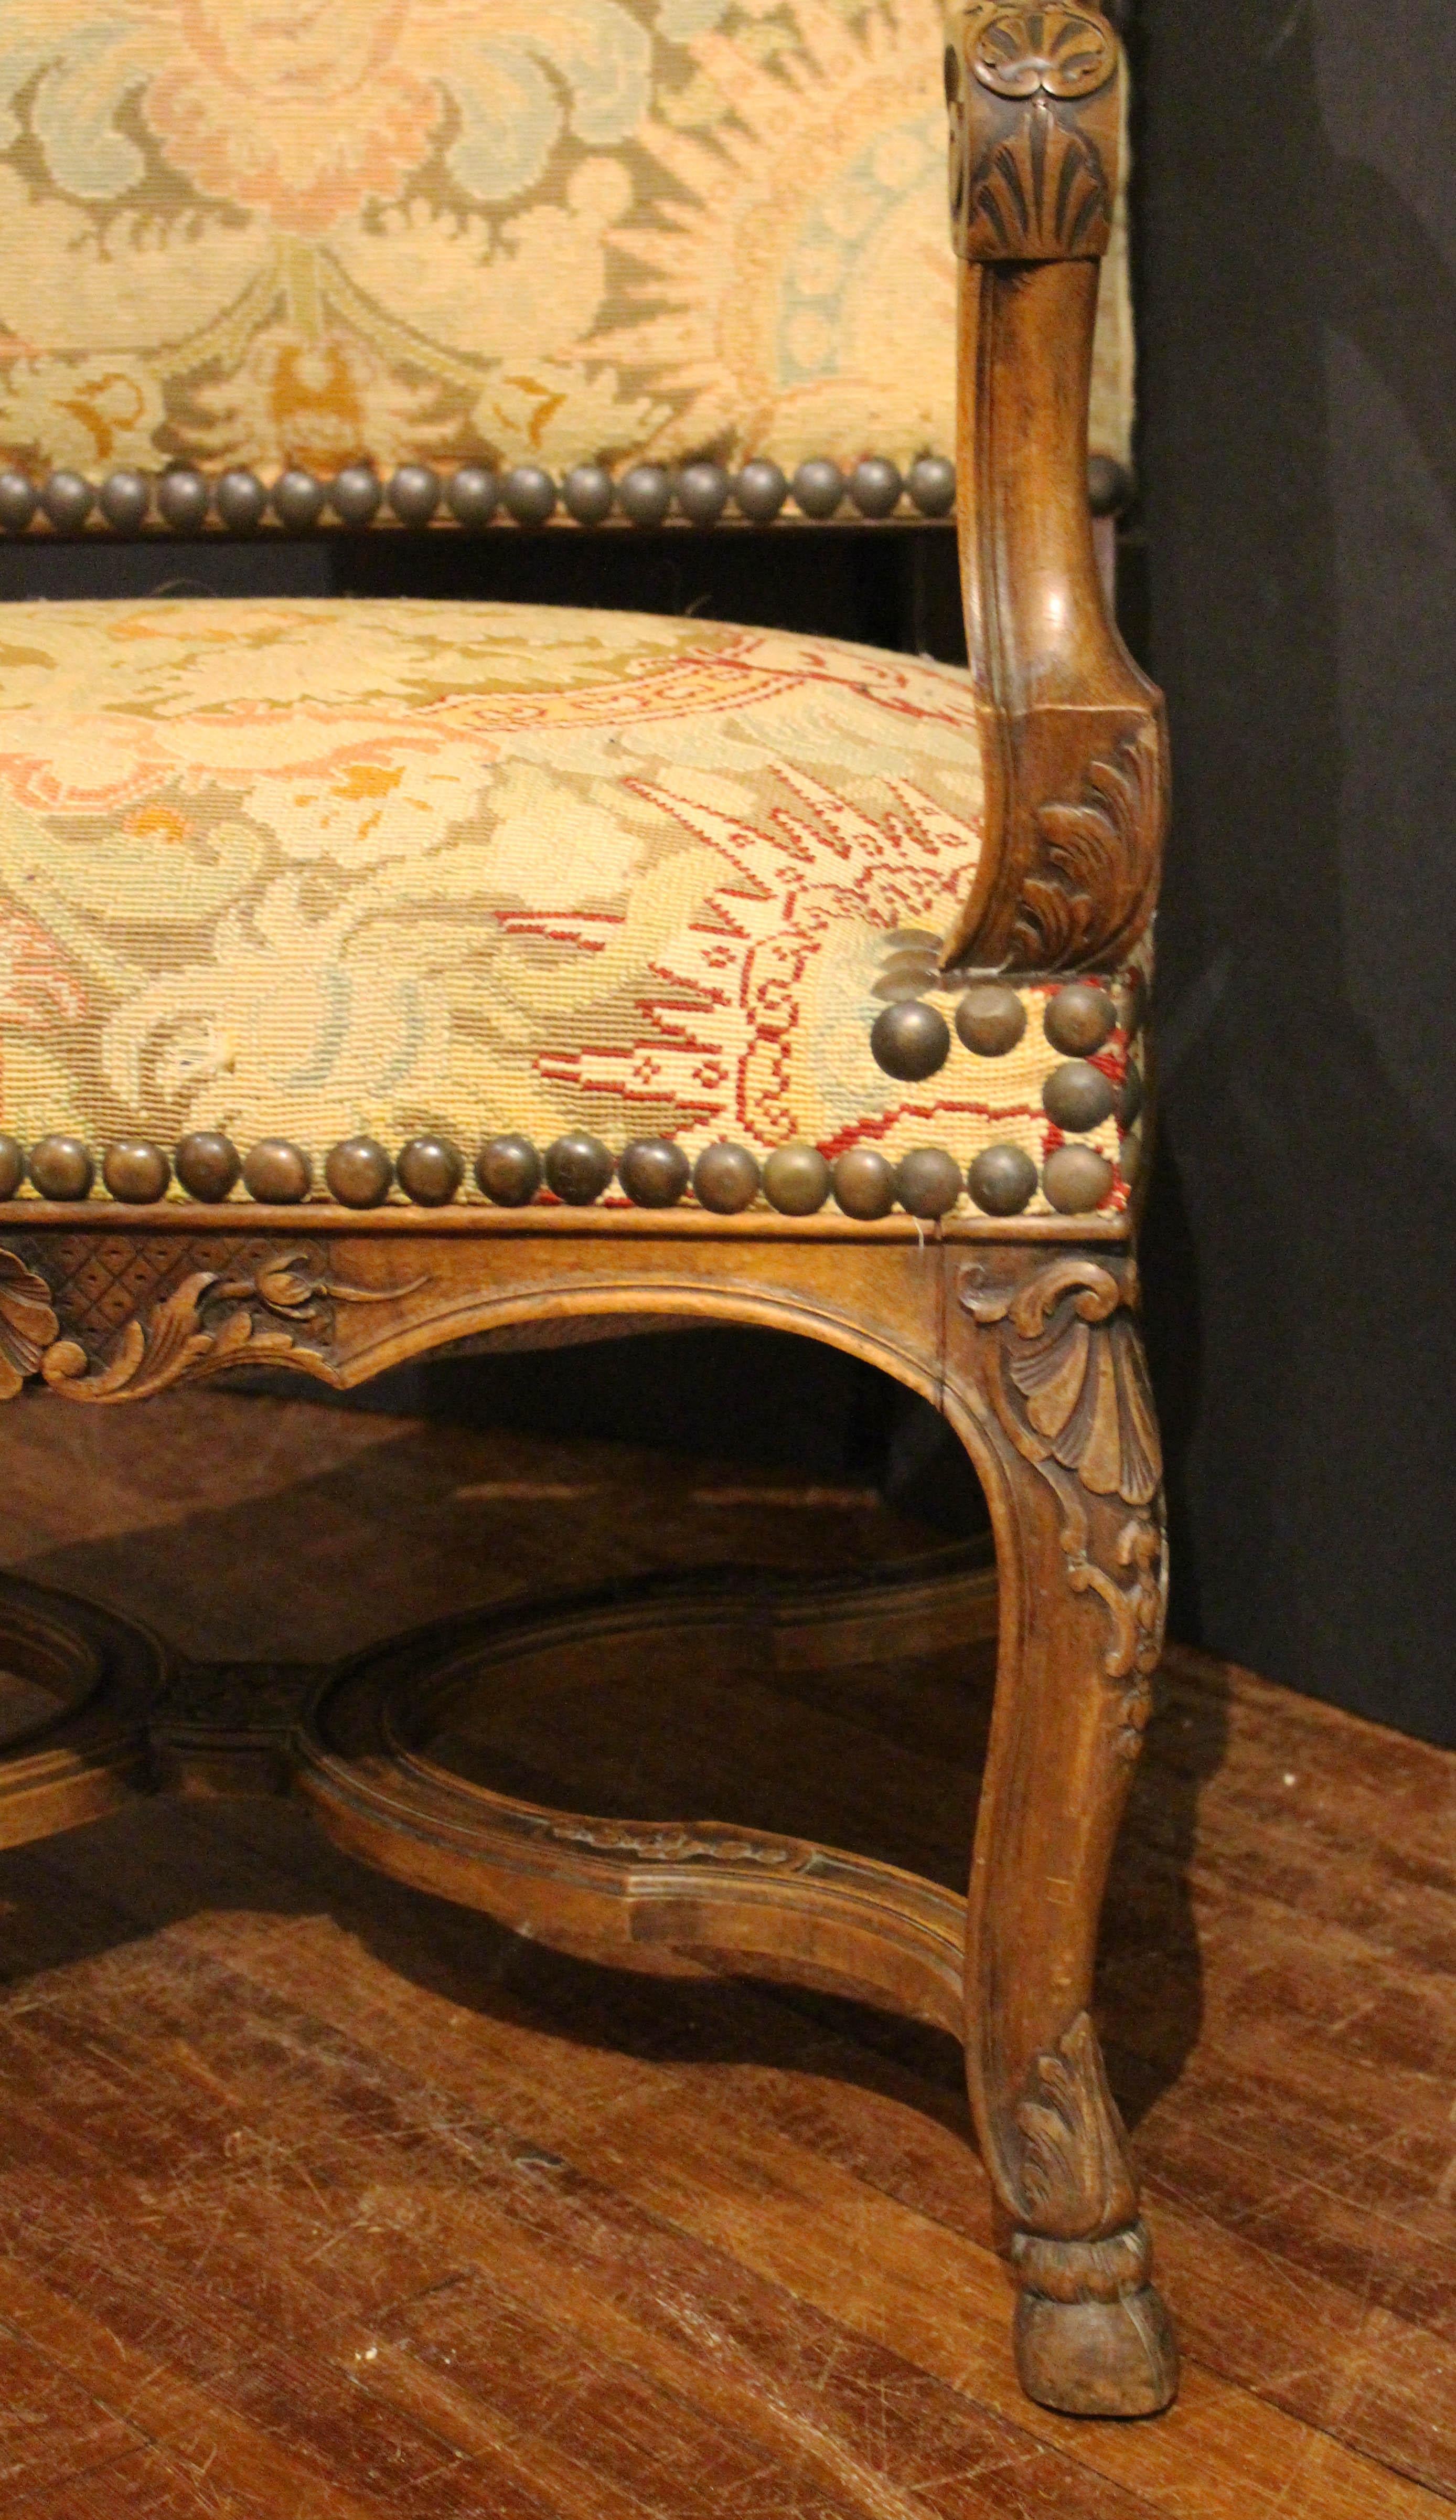 Late 19th century Regence style fauteuil, French. Well carved walnut. Shaped cross stretcher. Shell & acanthus carving throughout. Cabriole legs ending in hoof feet. Original tapestry upholstery with some fading. 26 3/4